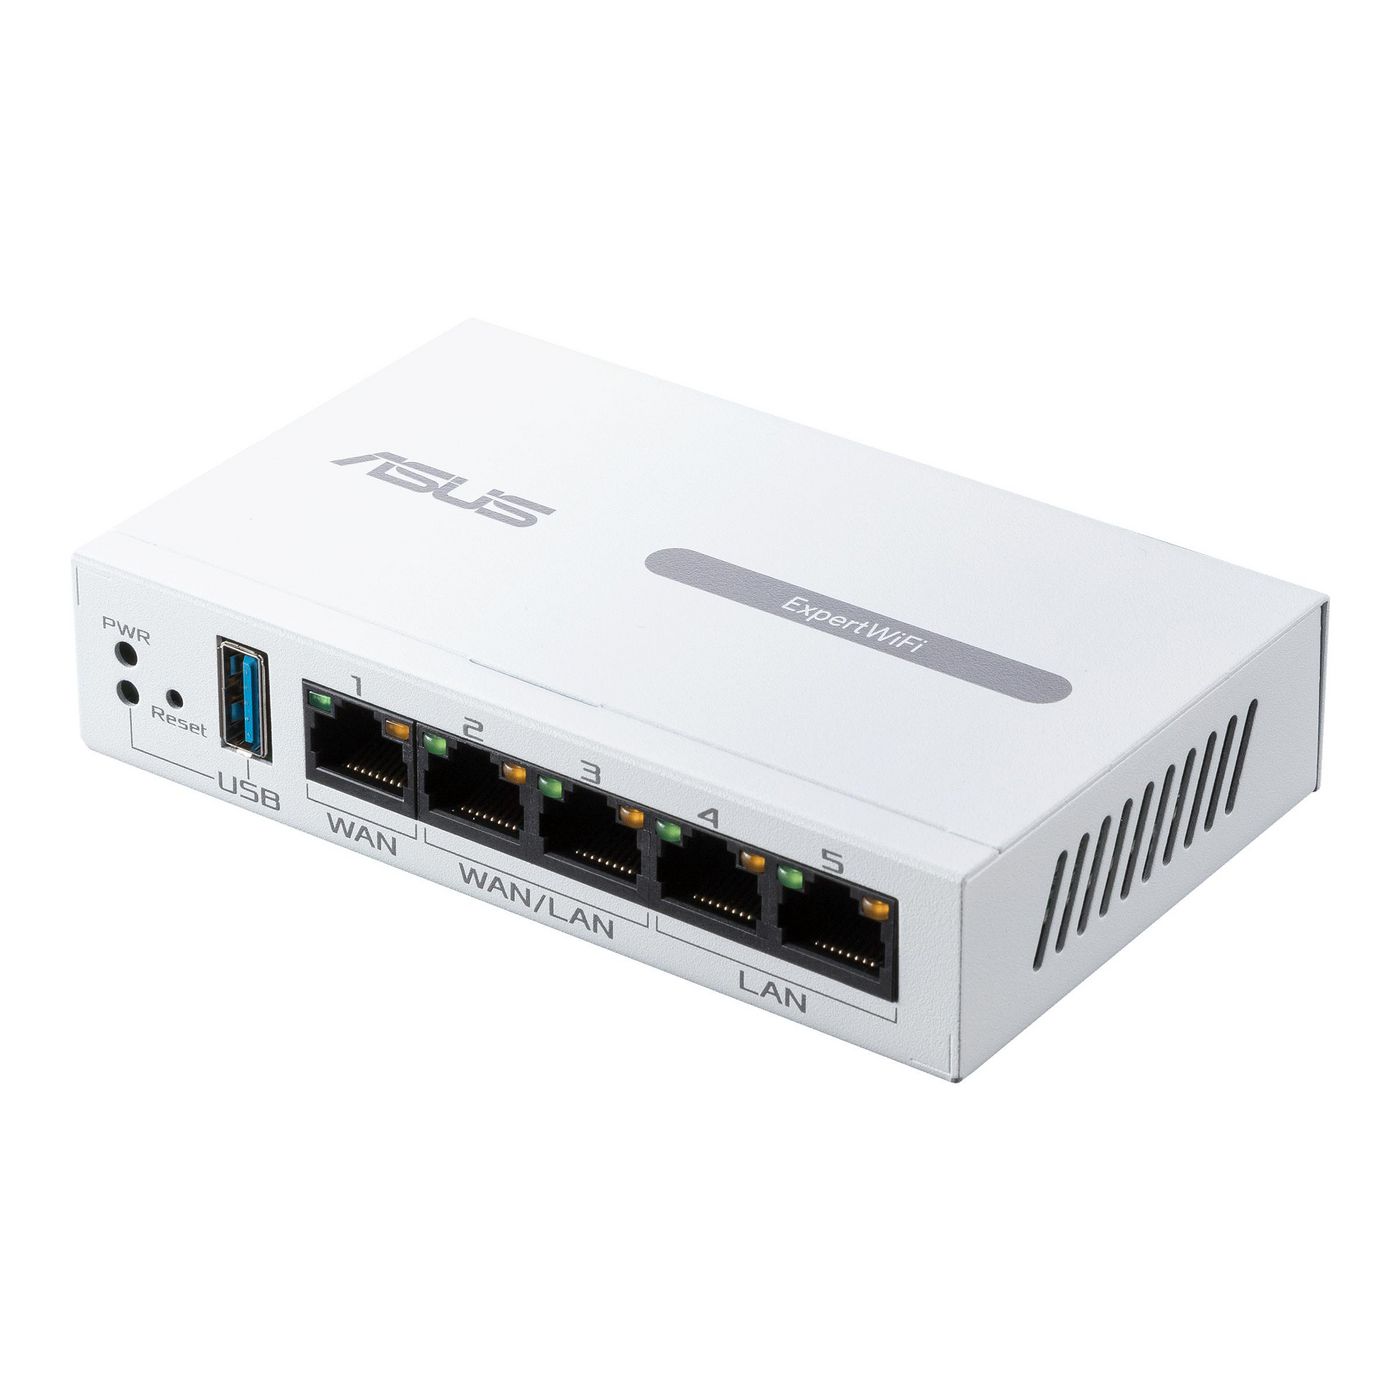 Asus 90IG08E0-MO3B00 W128829376 Expertwifi Ebg15 Wired Router 